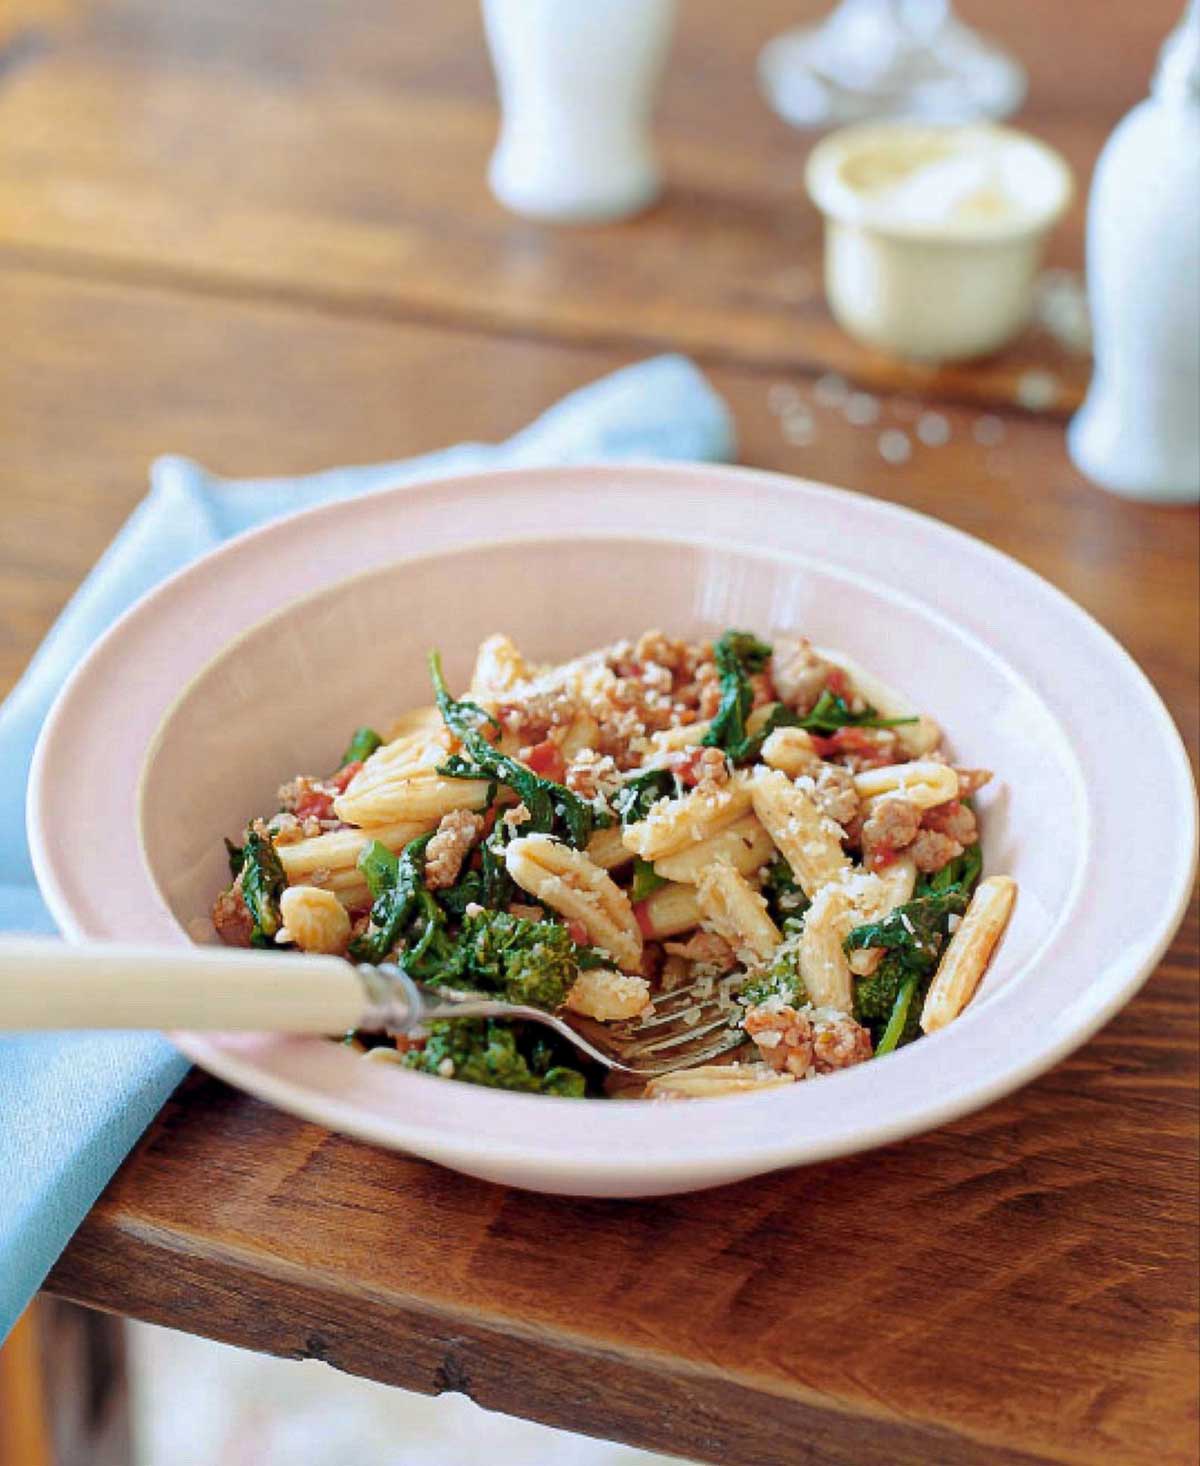 Bowl of cvatelli with turkey sausage, tomato, and broccoli rabe on a table, with a spoon.